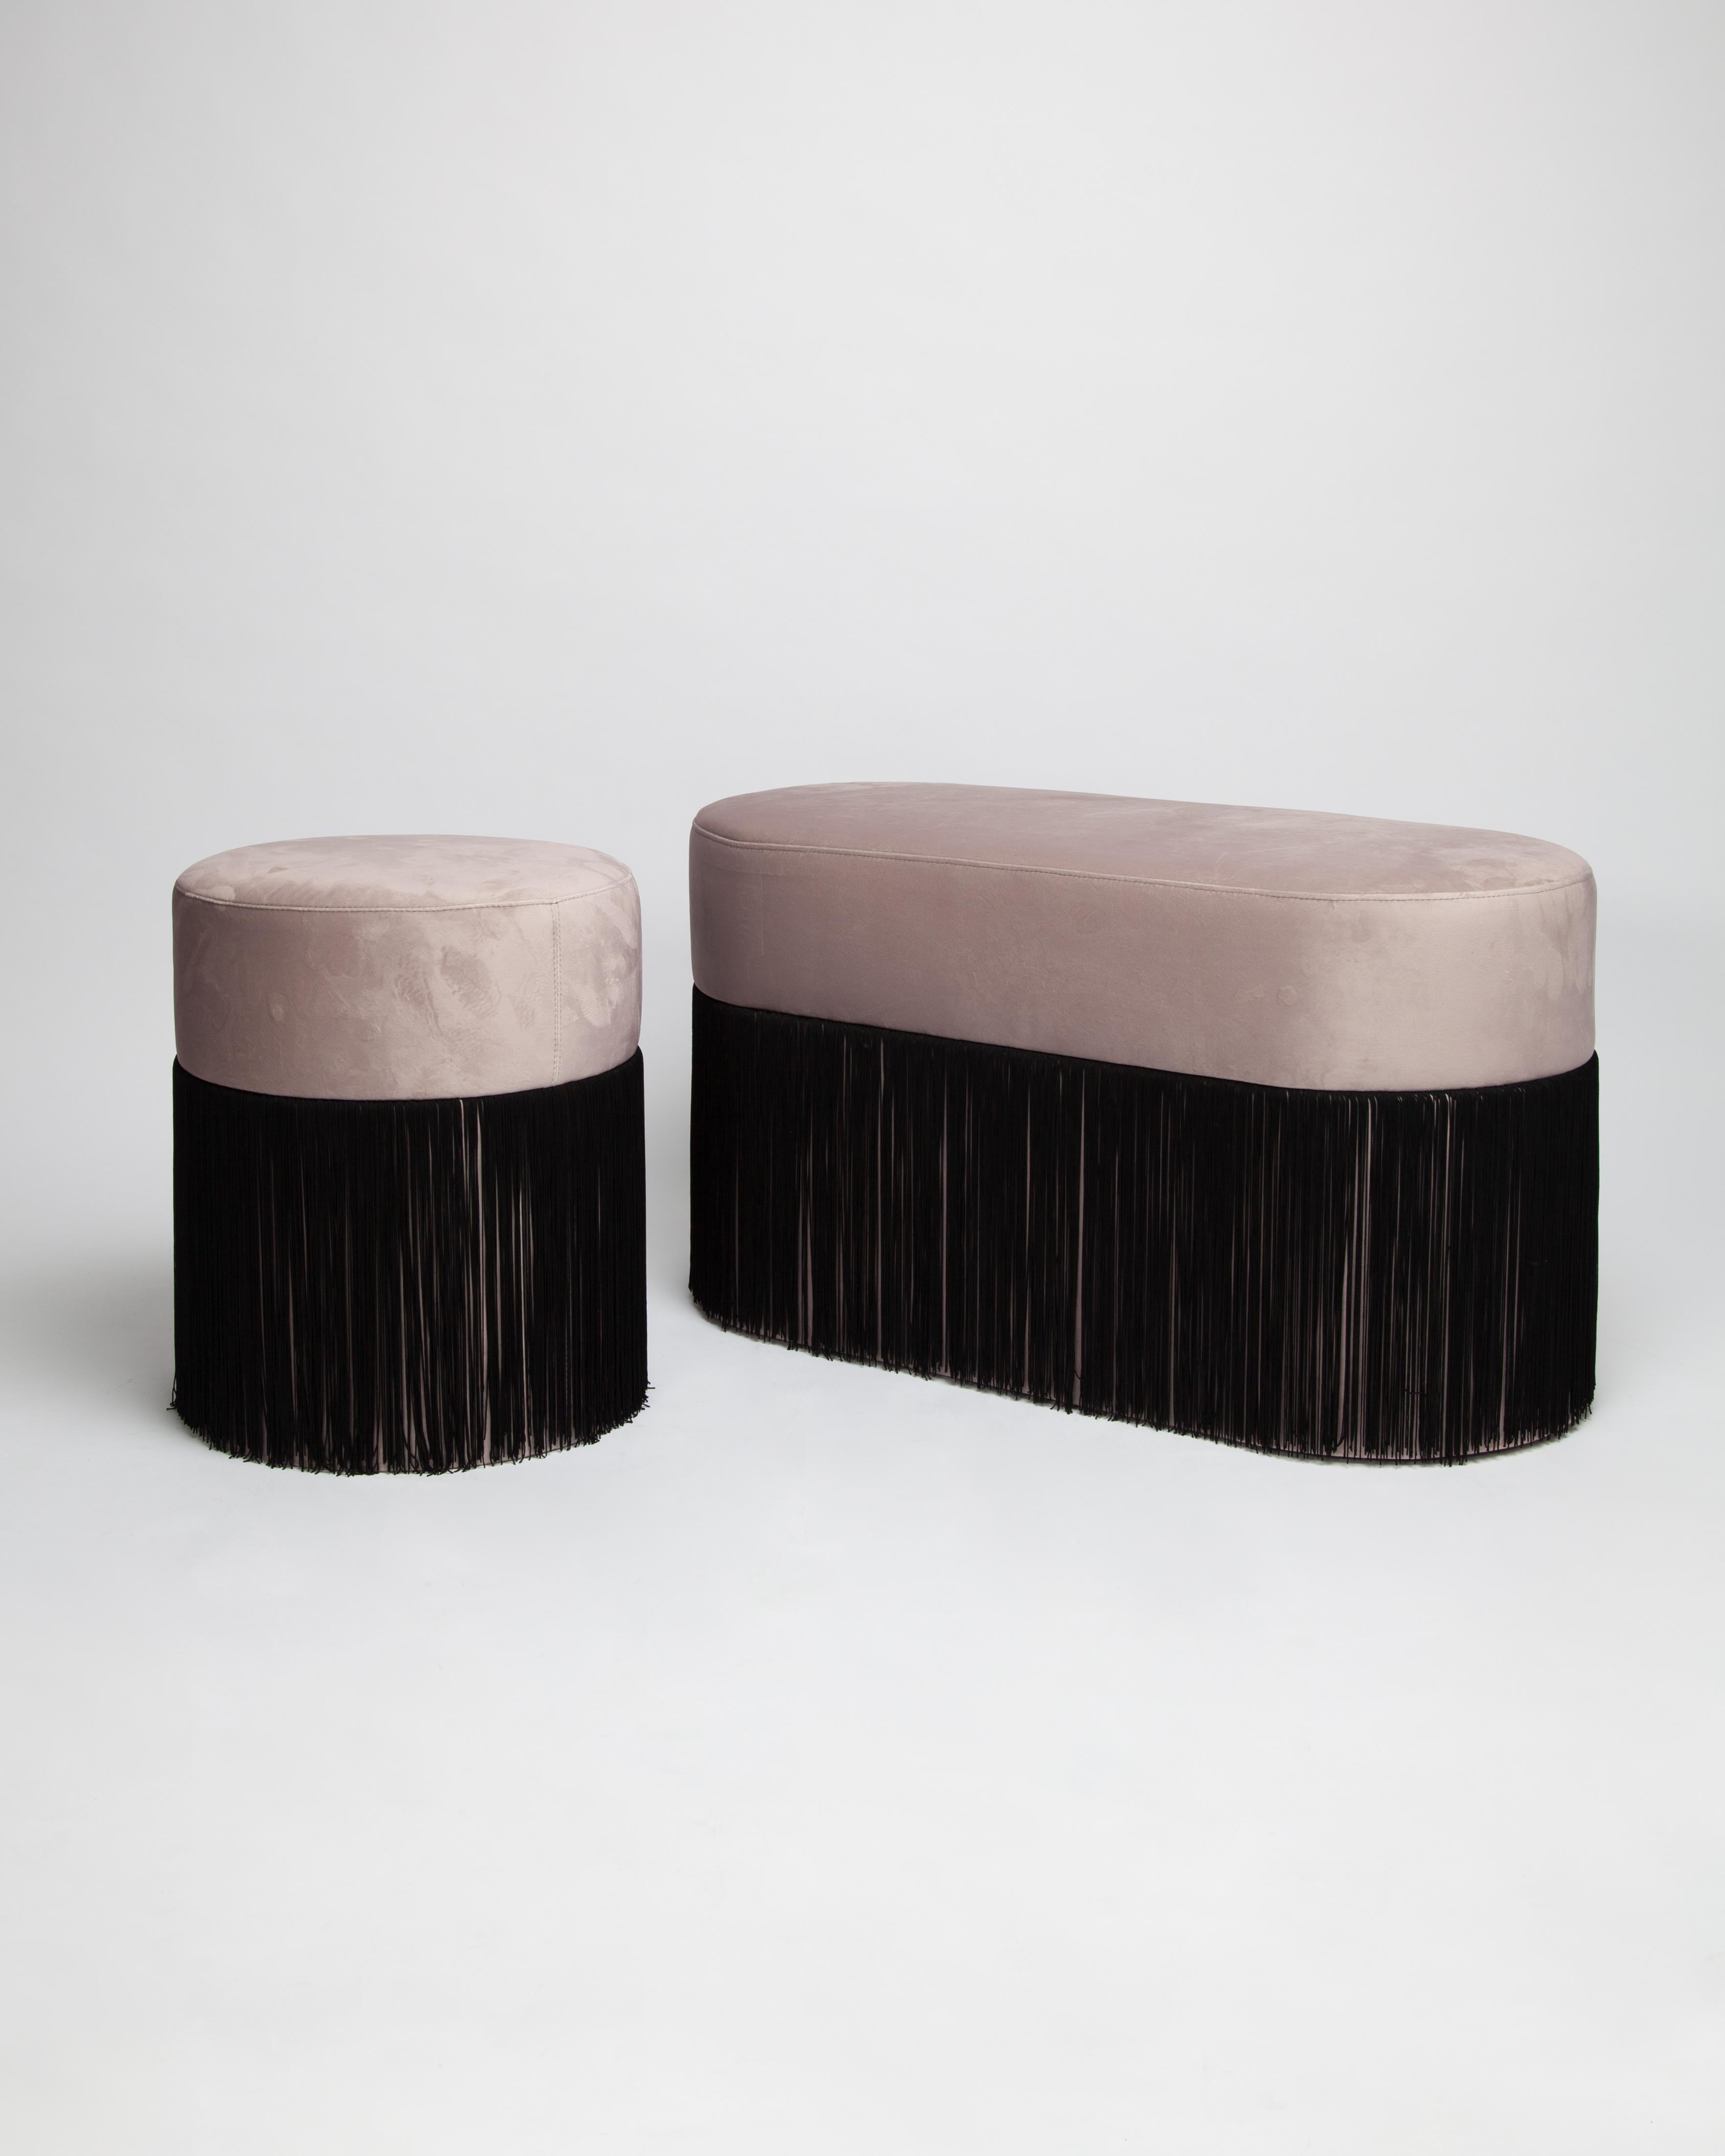 Pouf Pill S by Houtique 1